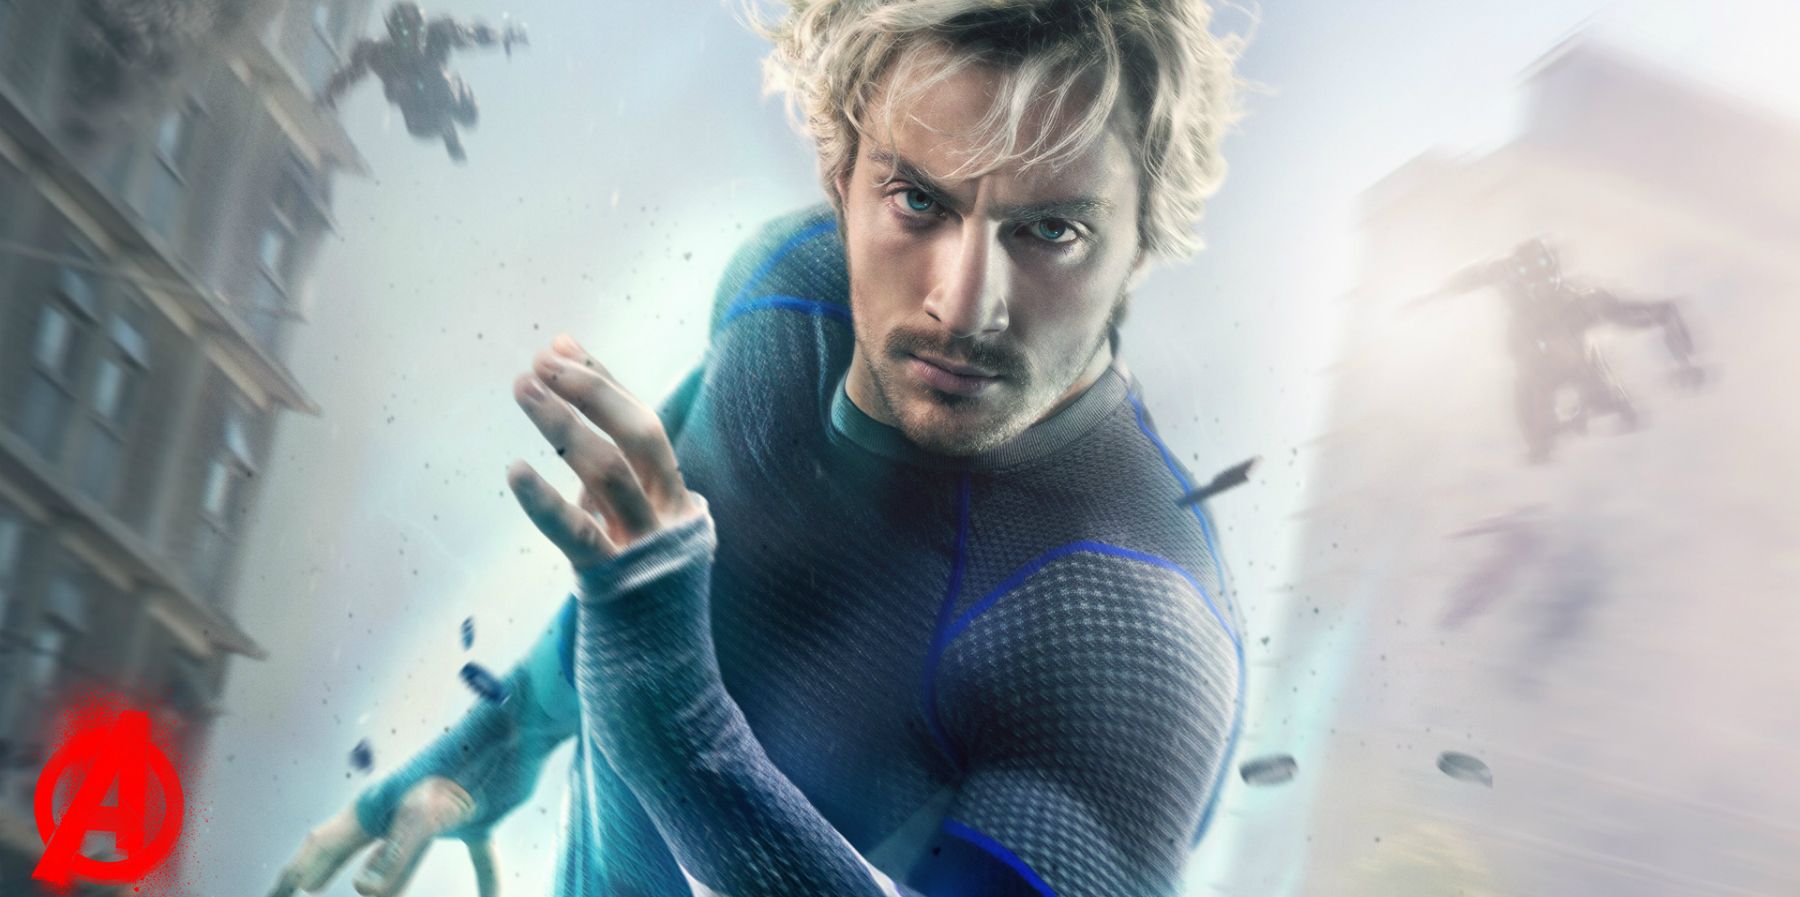 Aaron Taylor-Johnson Quicksilver poster for Avengers Age of Ultron